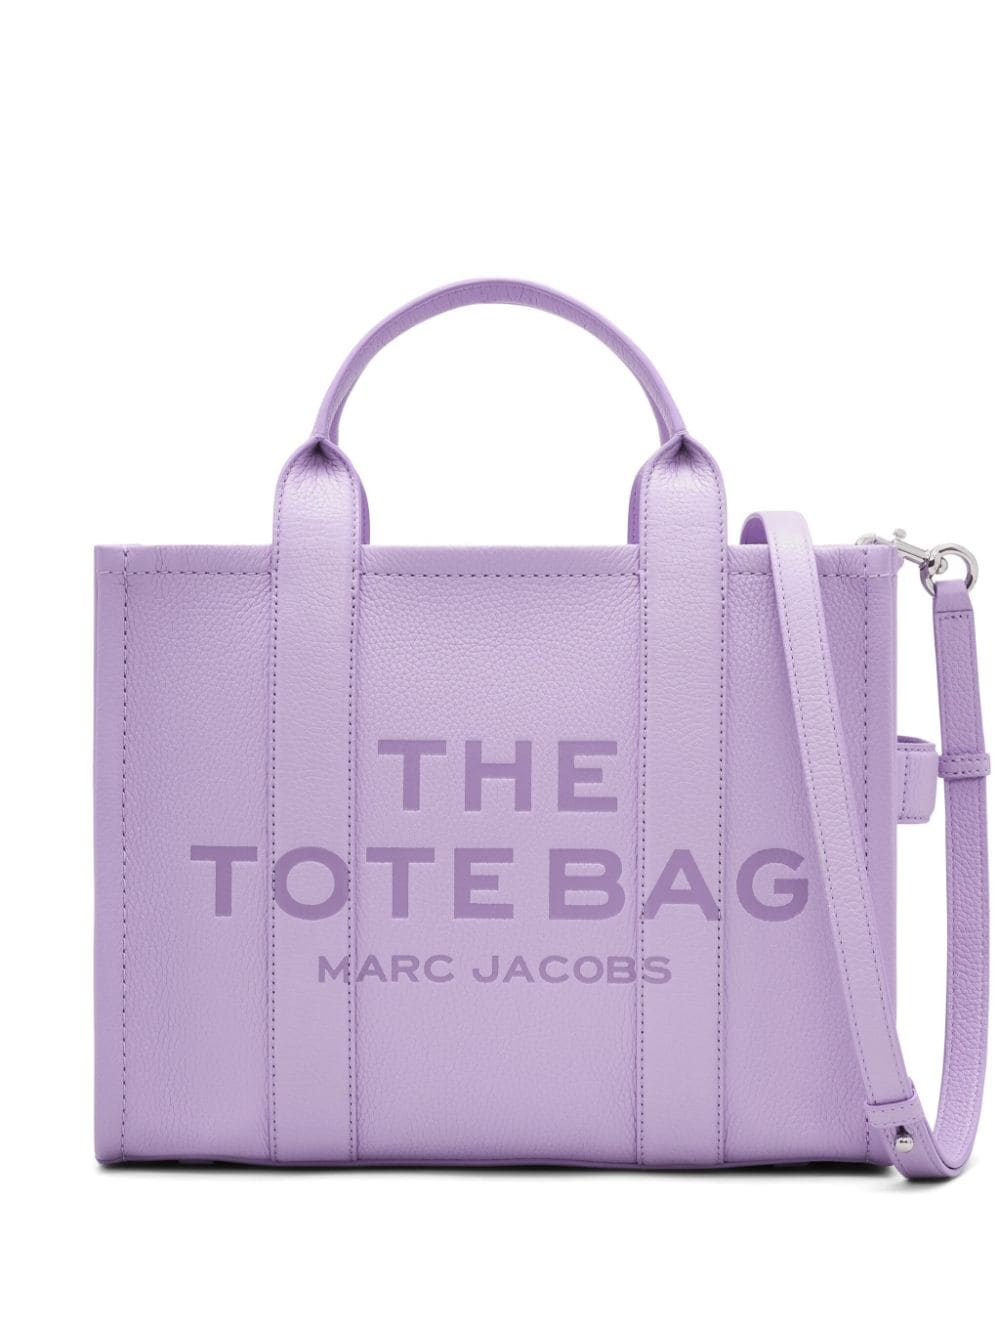 Marc Jacobs The Leather Medium Tote Bag In 紫色